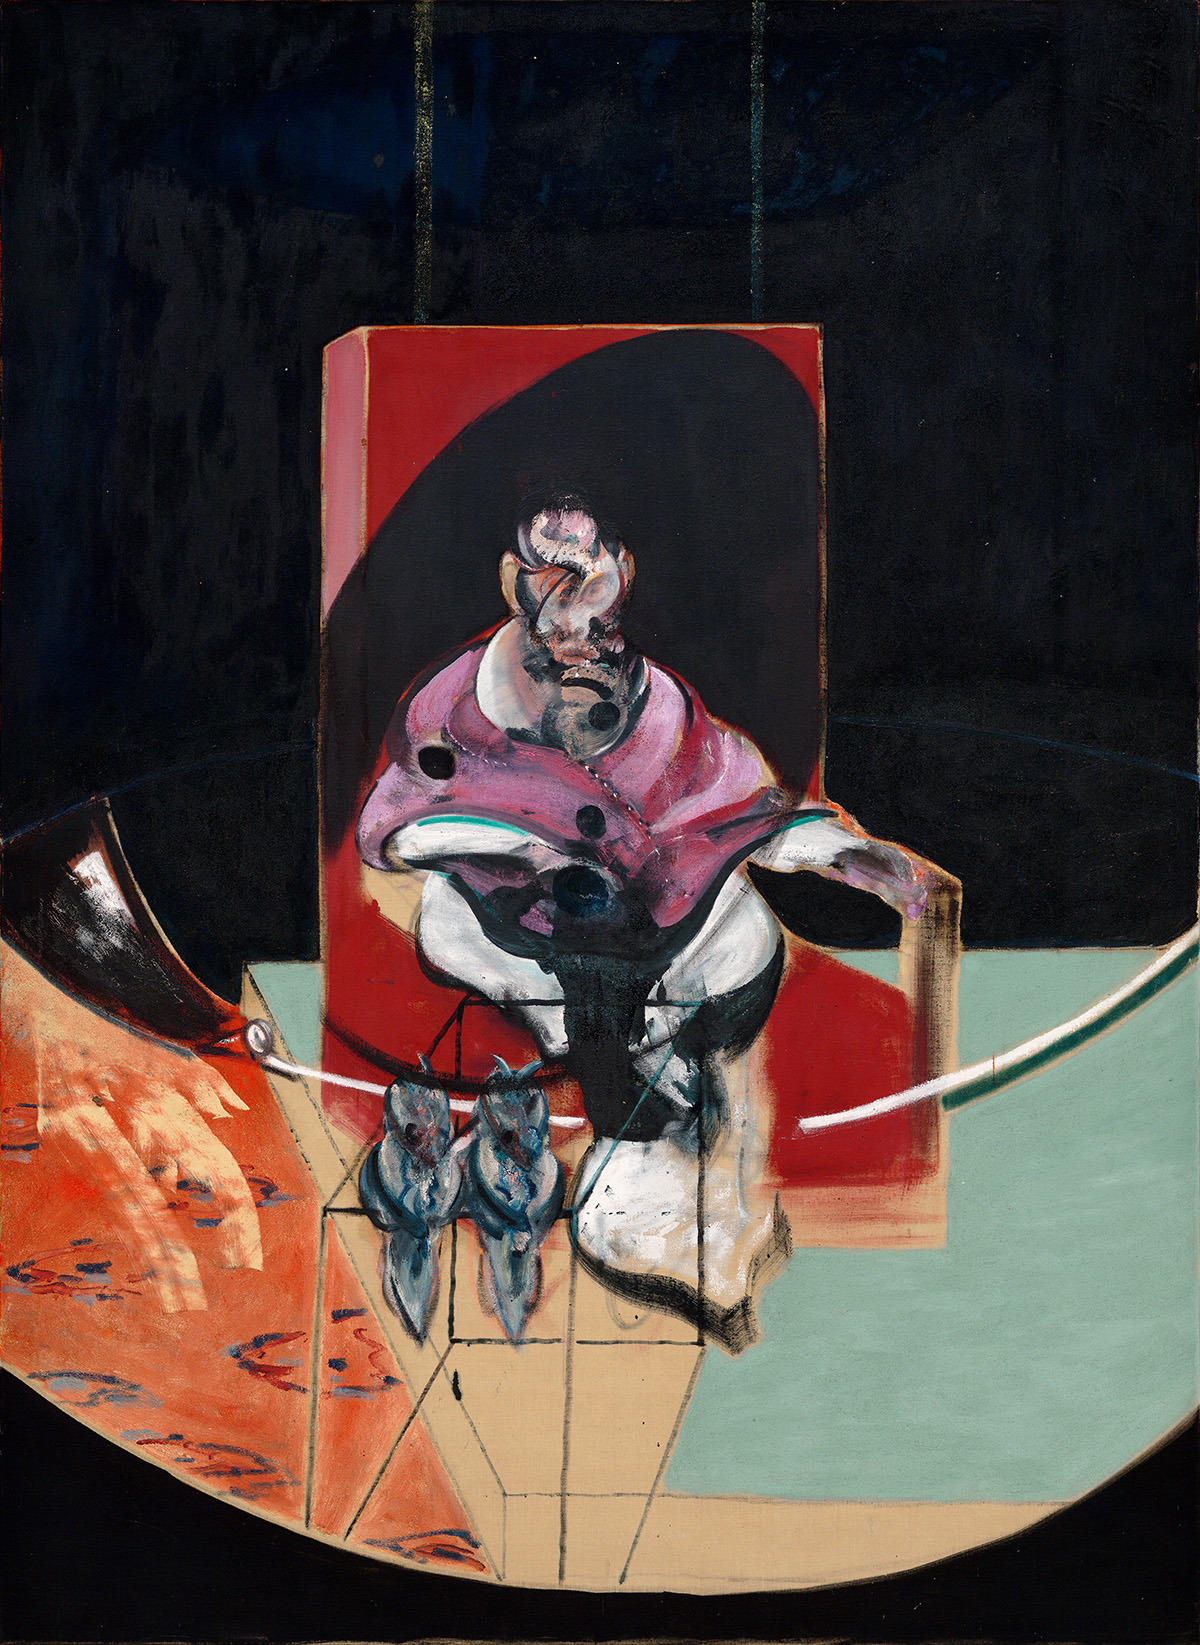 Francis Bacon, Study for Portrait (With Two Owls), 1963. Oil on canvas. CR no. 63-14. © The Estate of Francis Bacon / DACS London 2021. All rights reserved.